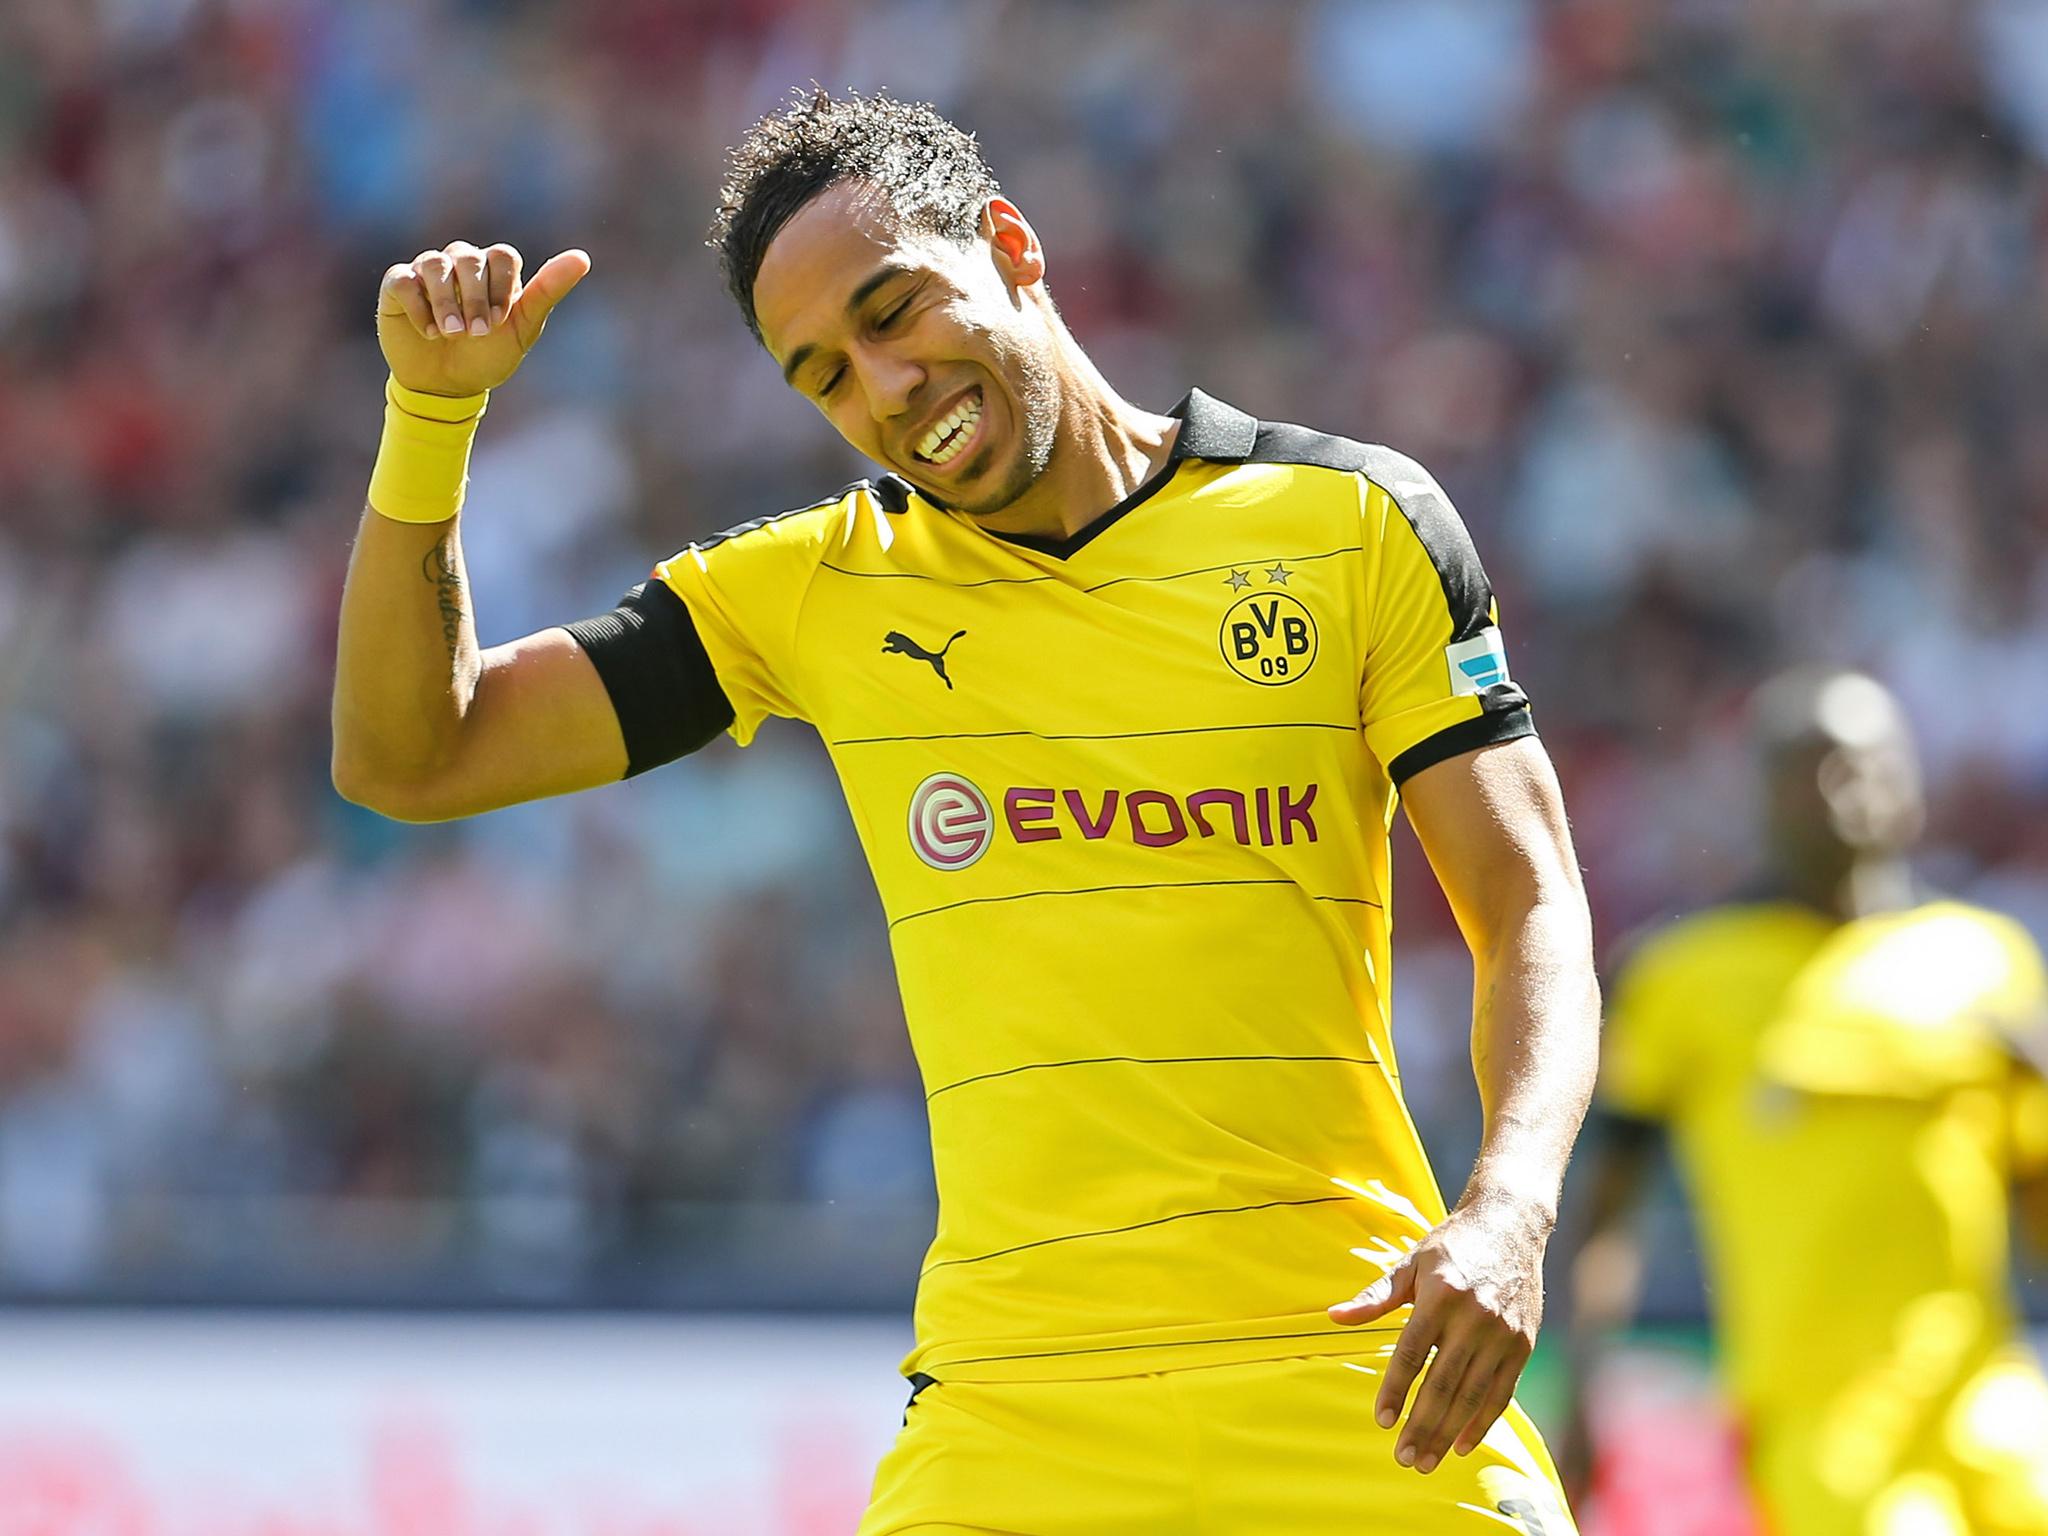 Aubameyang is one of the most coveted strikers in European football